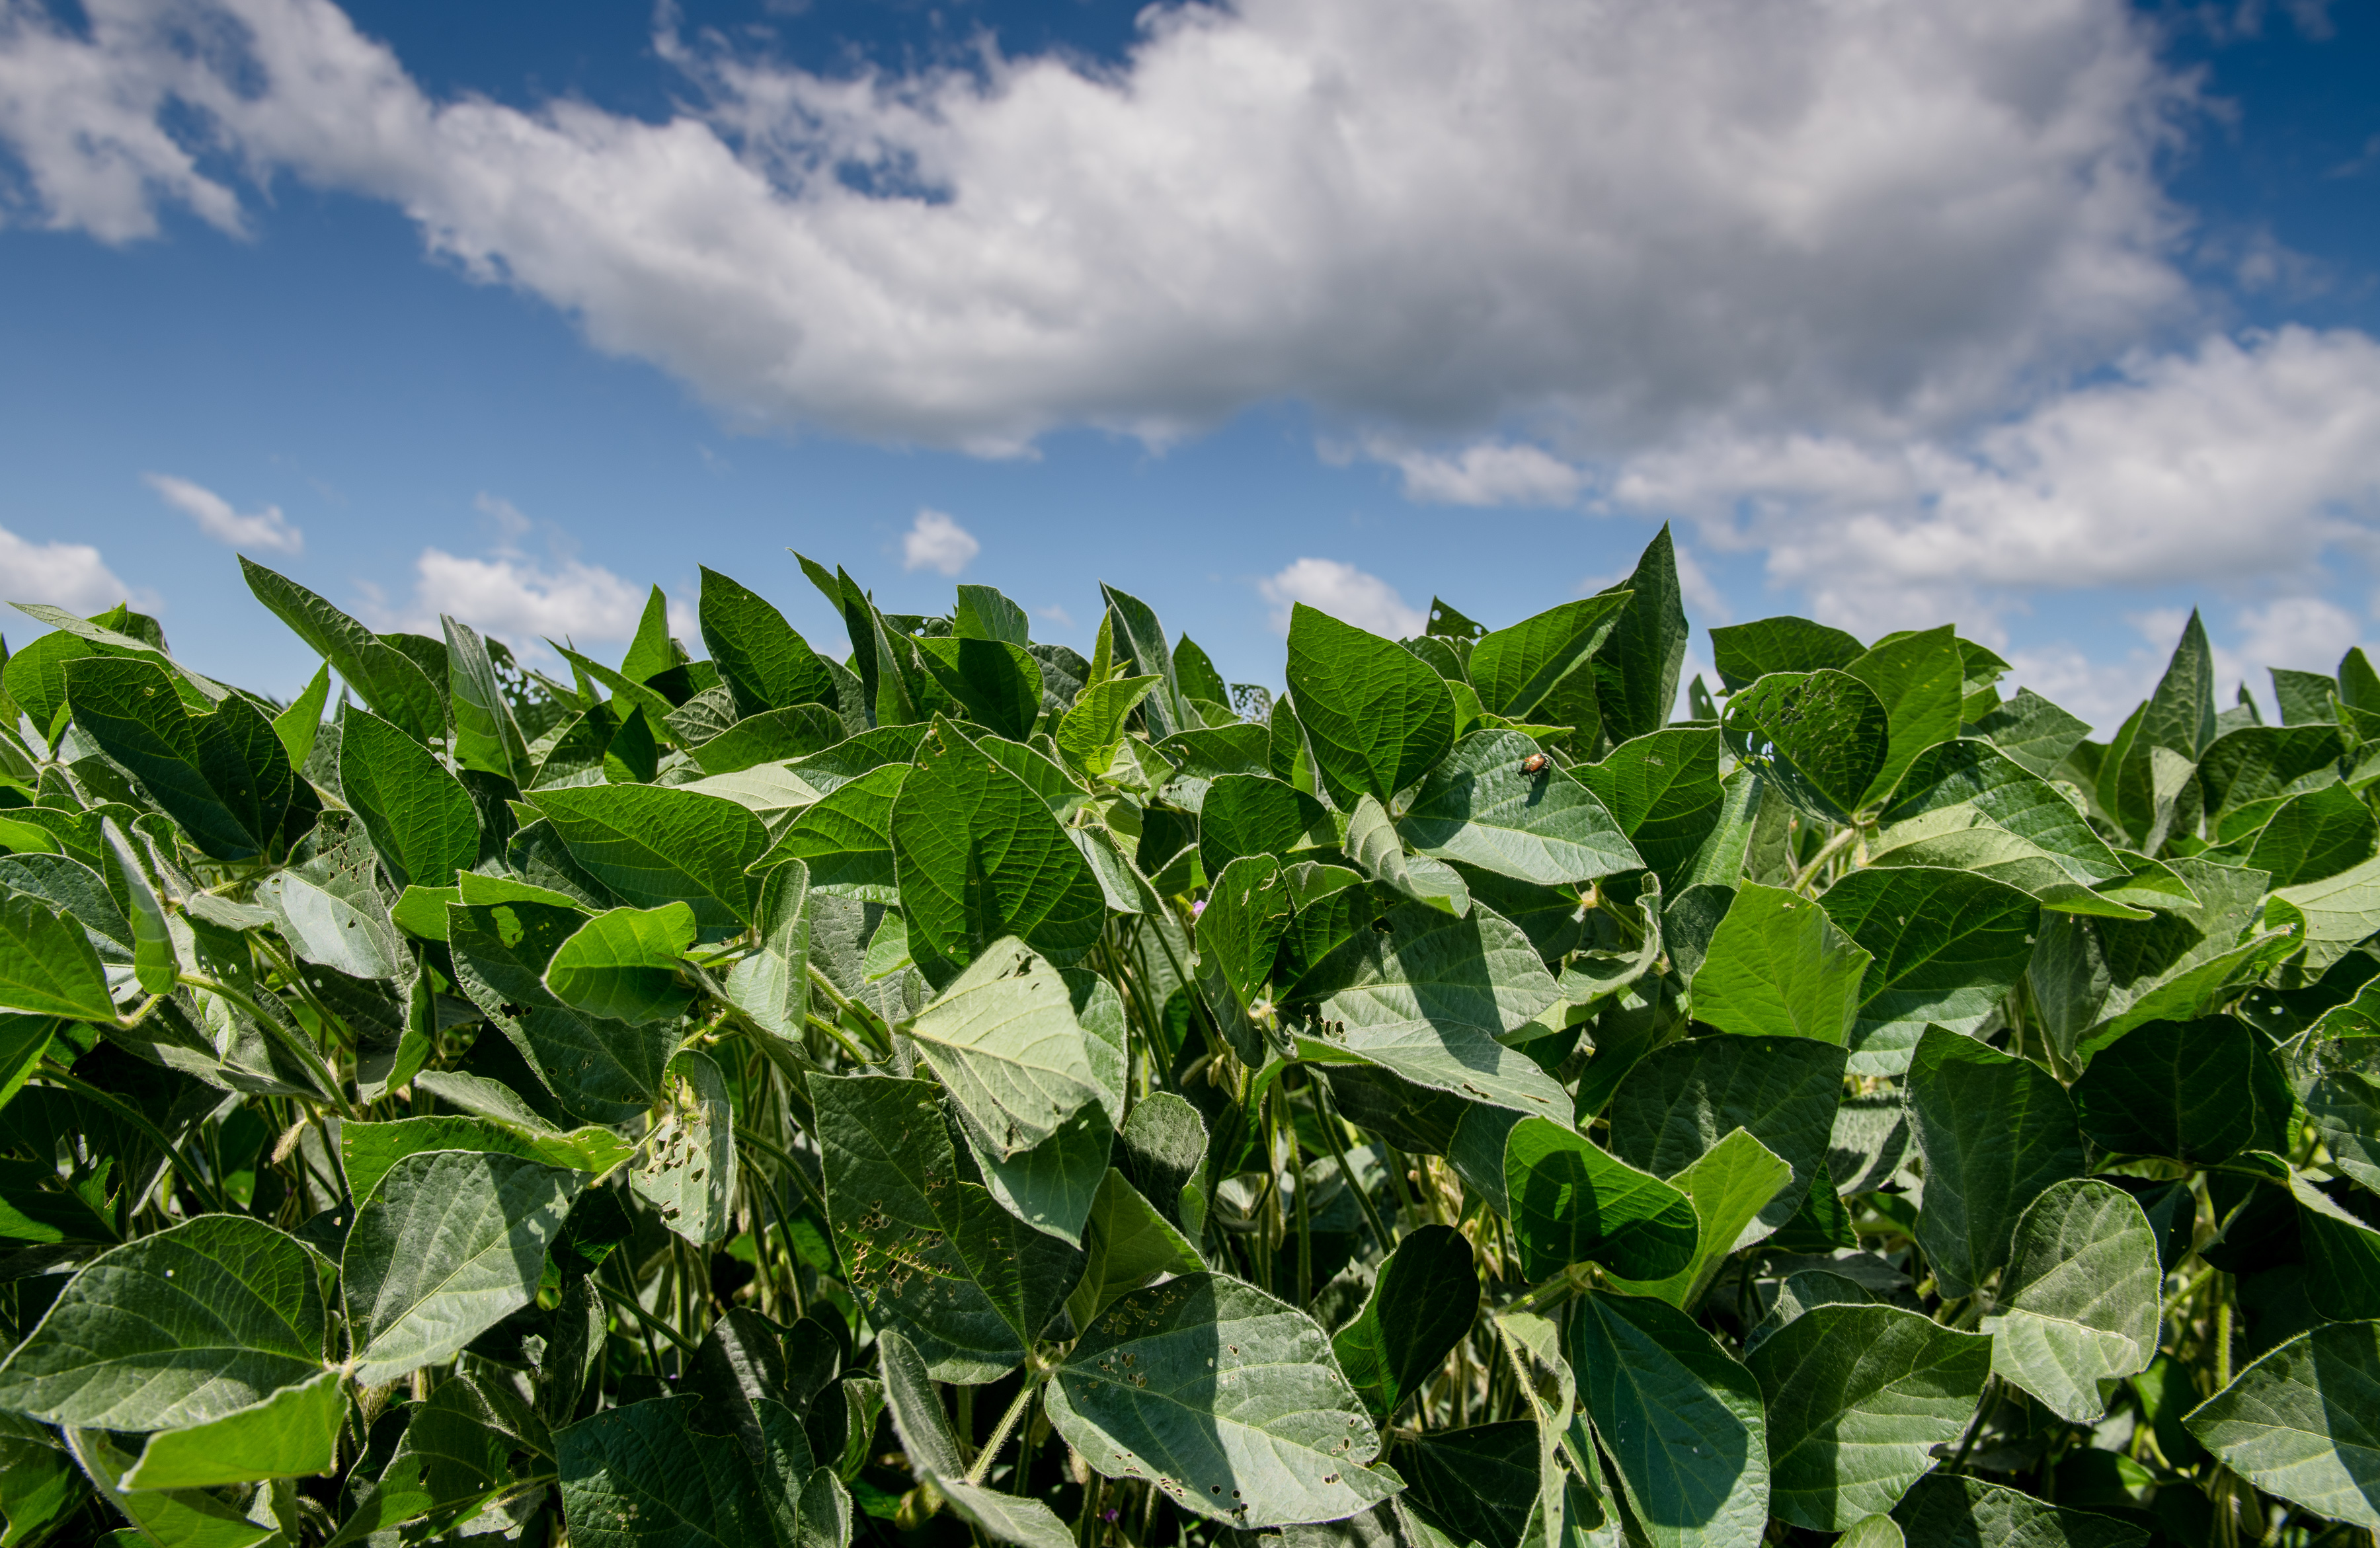 A close-up of soybean plants under a blue sky with some